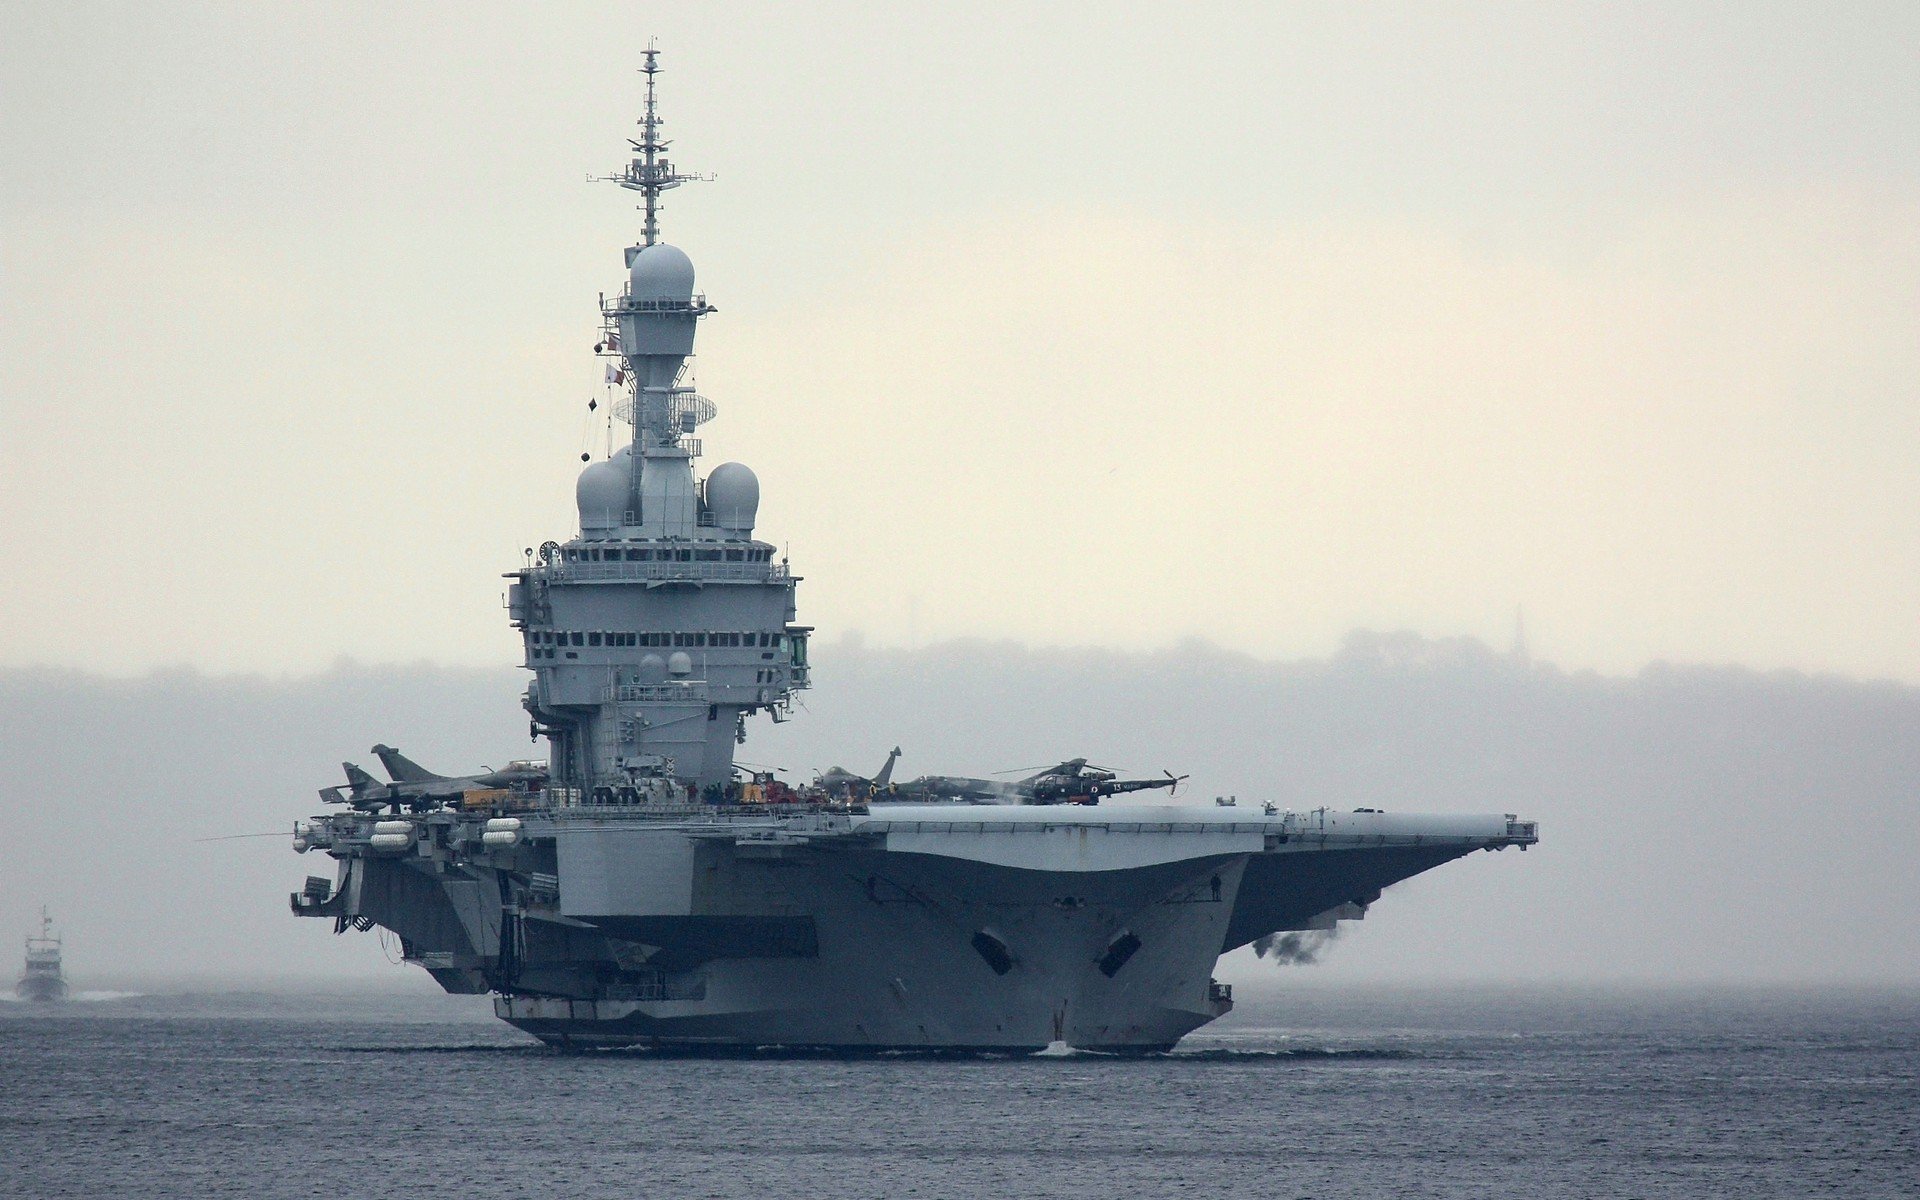 Charles de Gaulle, Aircraft carrier, French navy Wallpaper